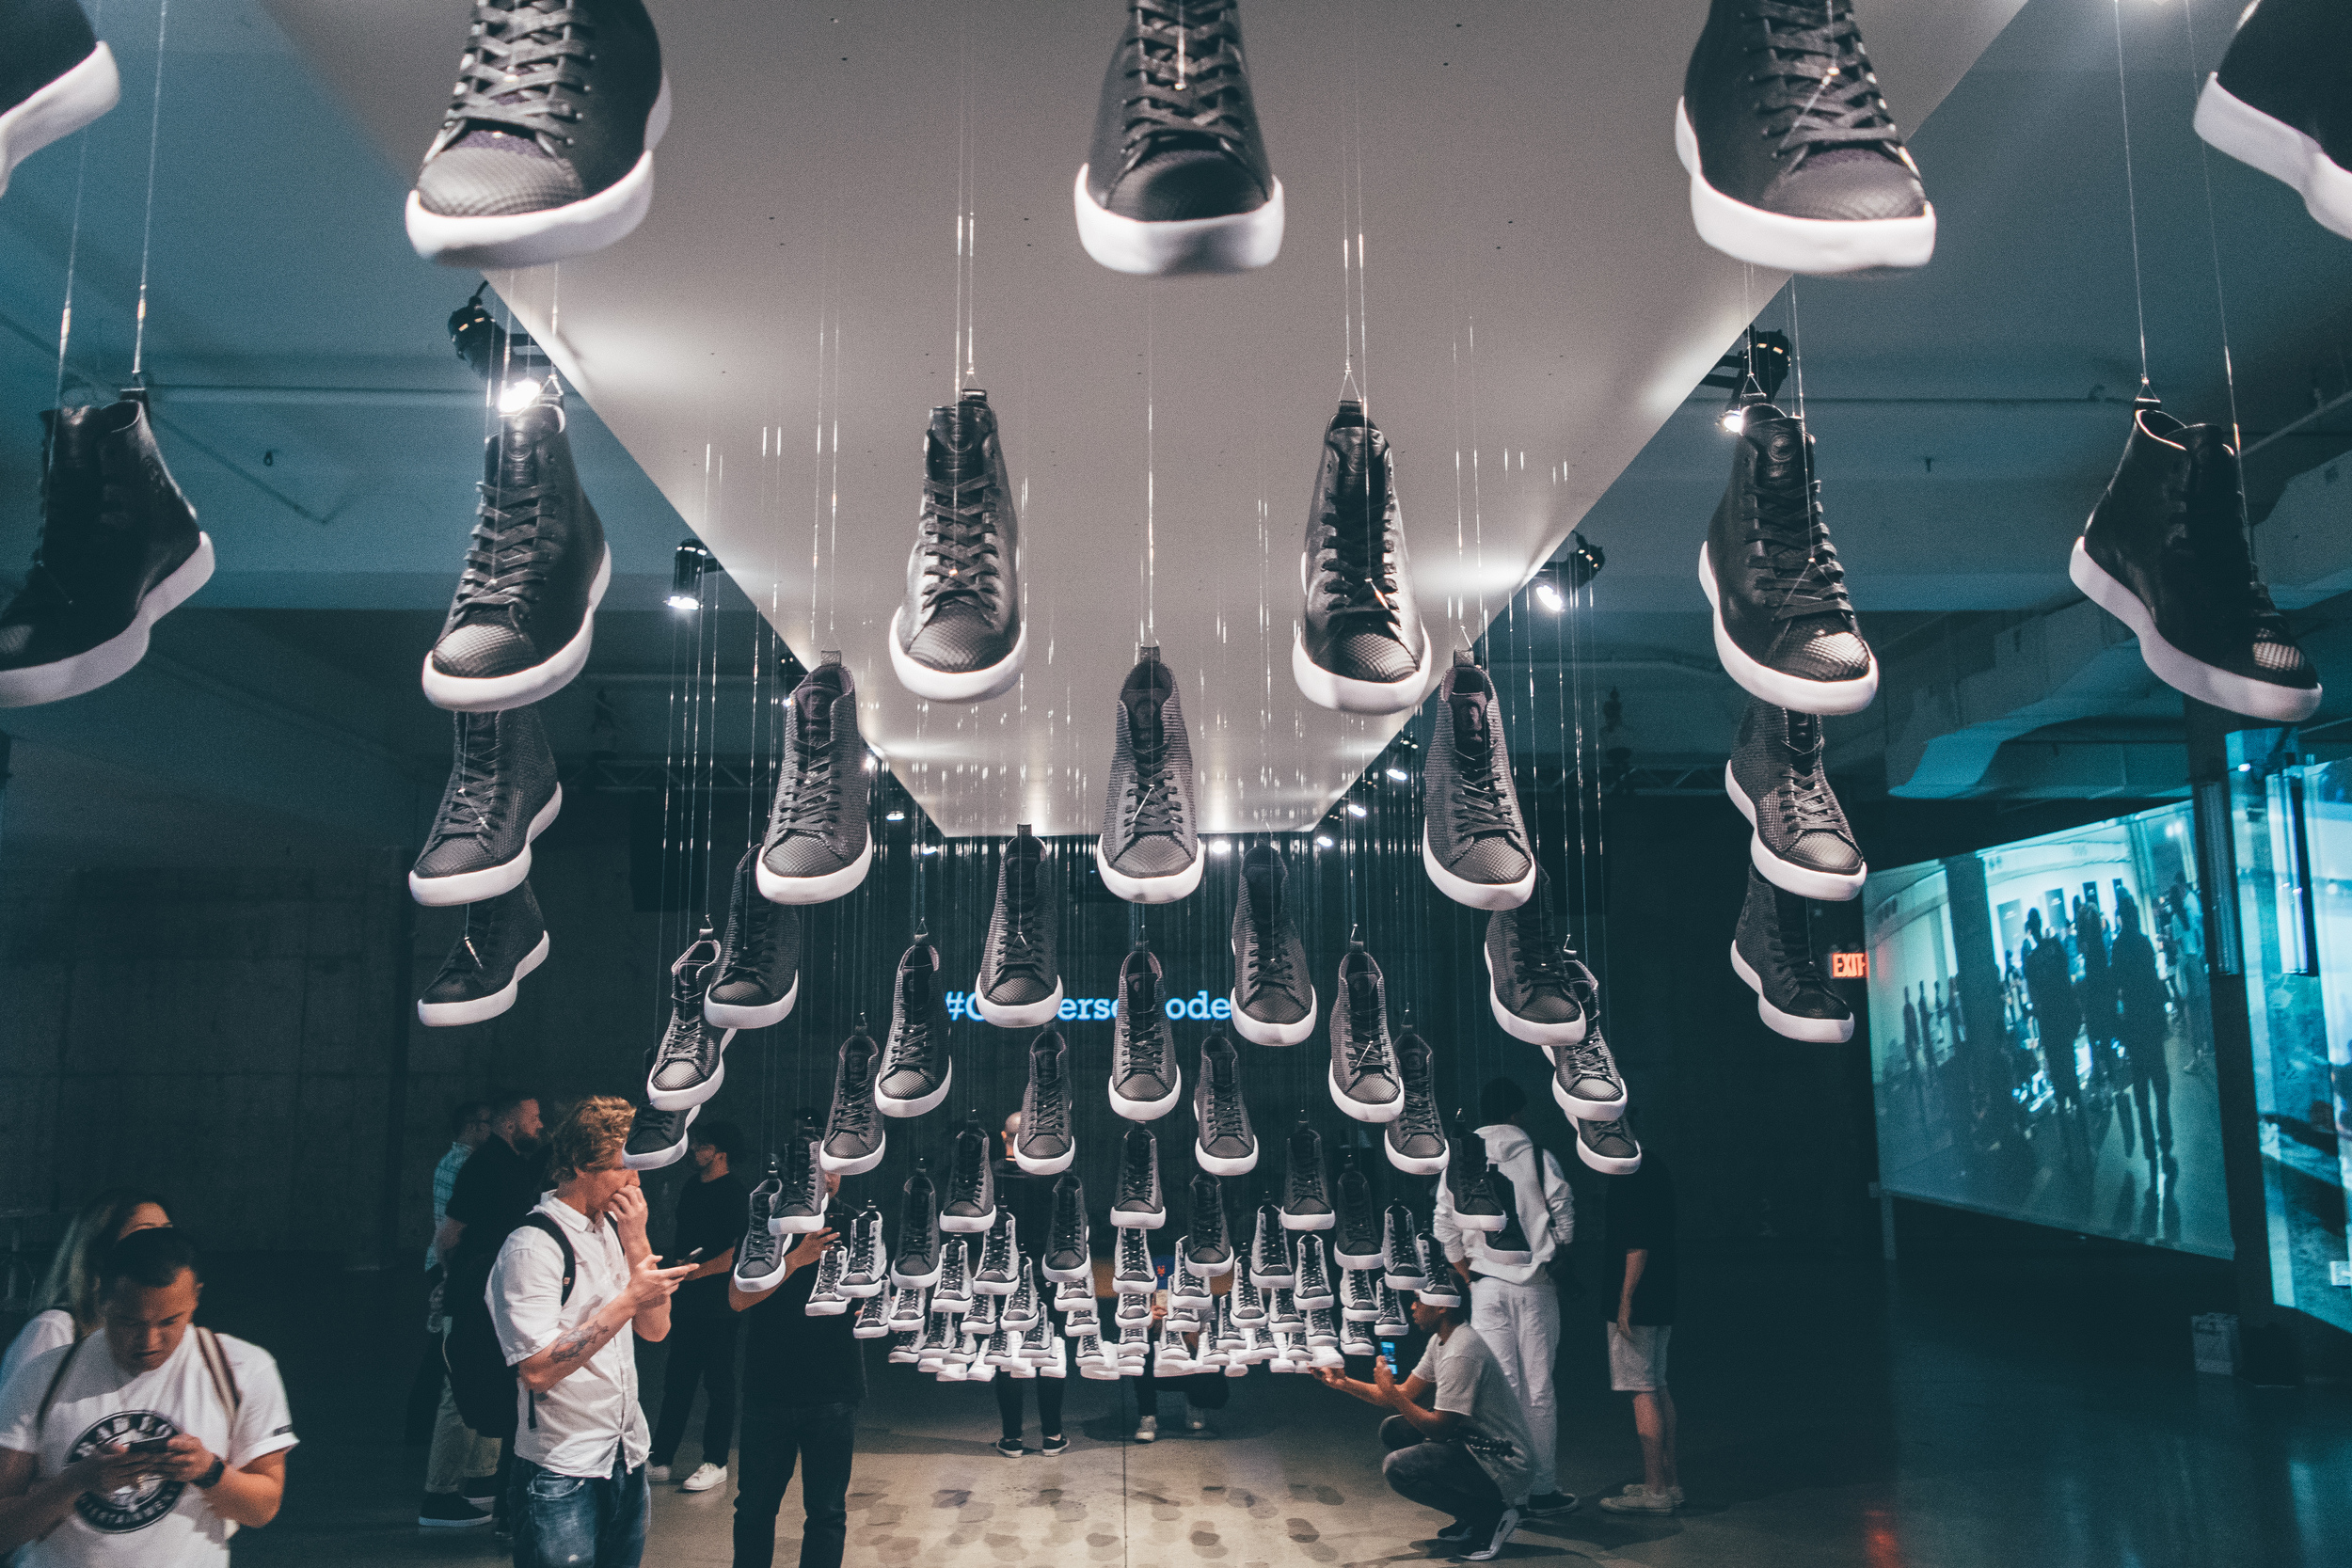  Converse unveils All Star Modern sneaker in NY. / Photo: ©&nbsp;Nabil Miftahi for SUSPEND Magazine 